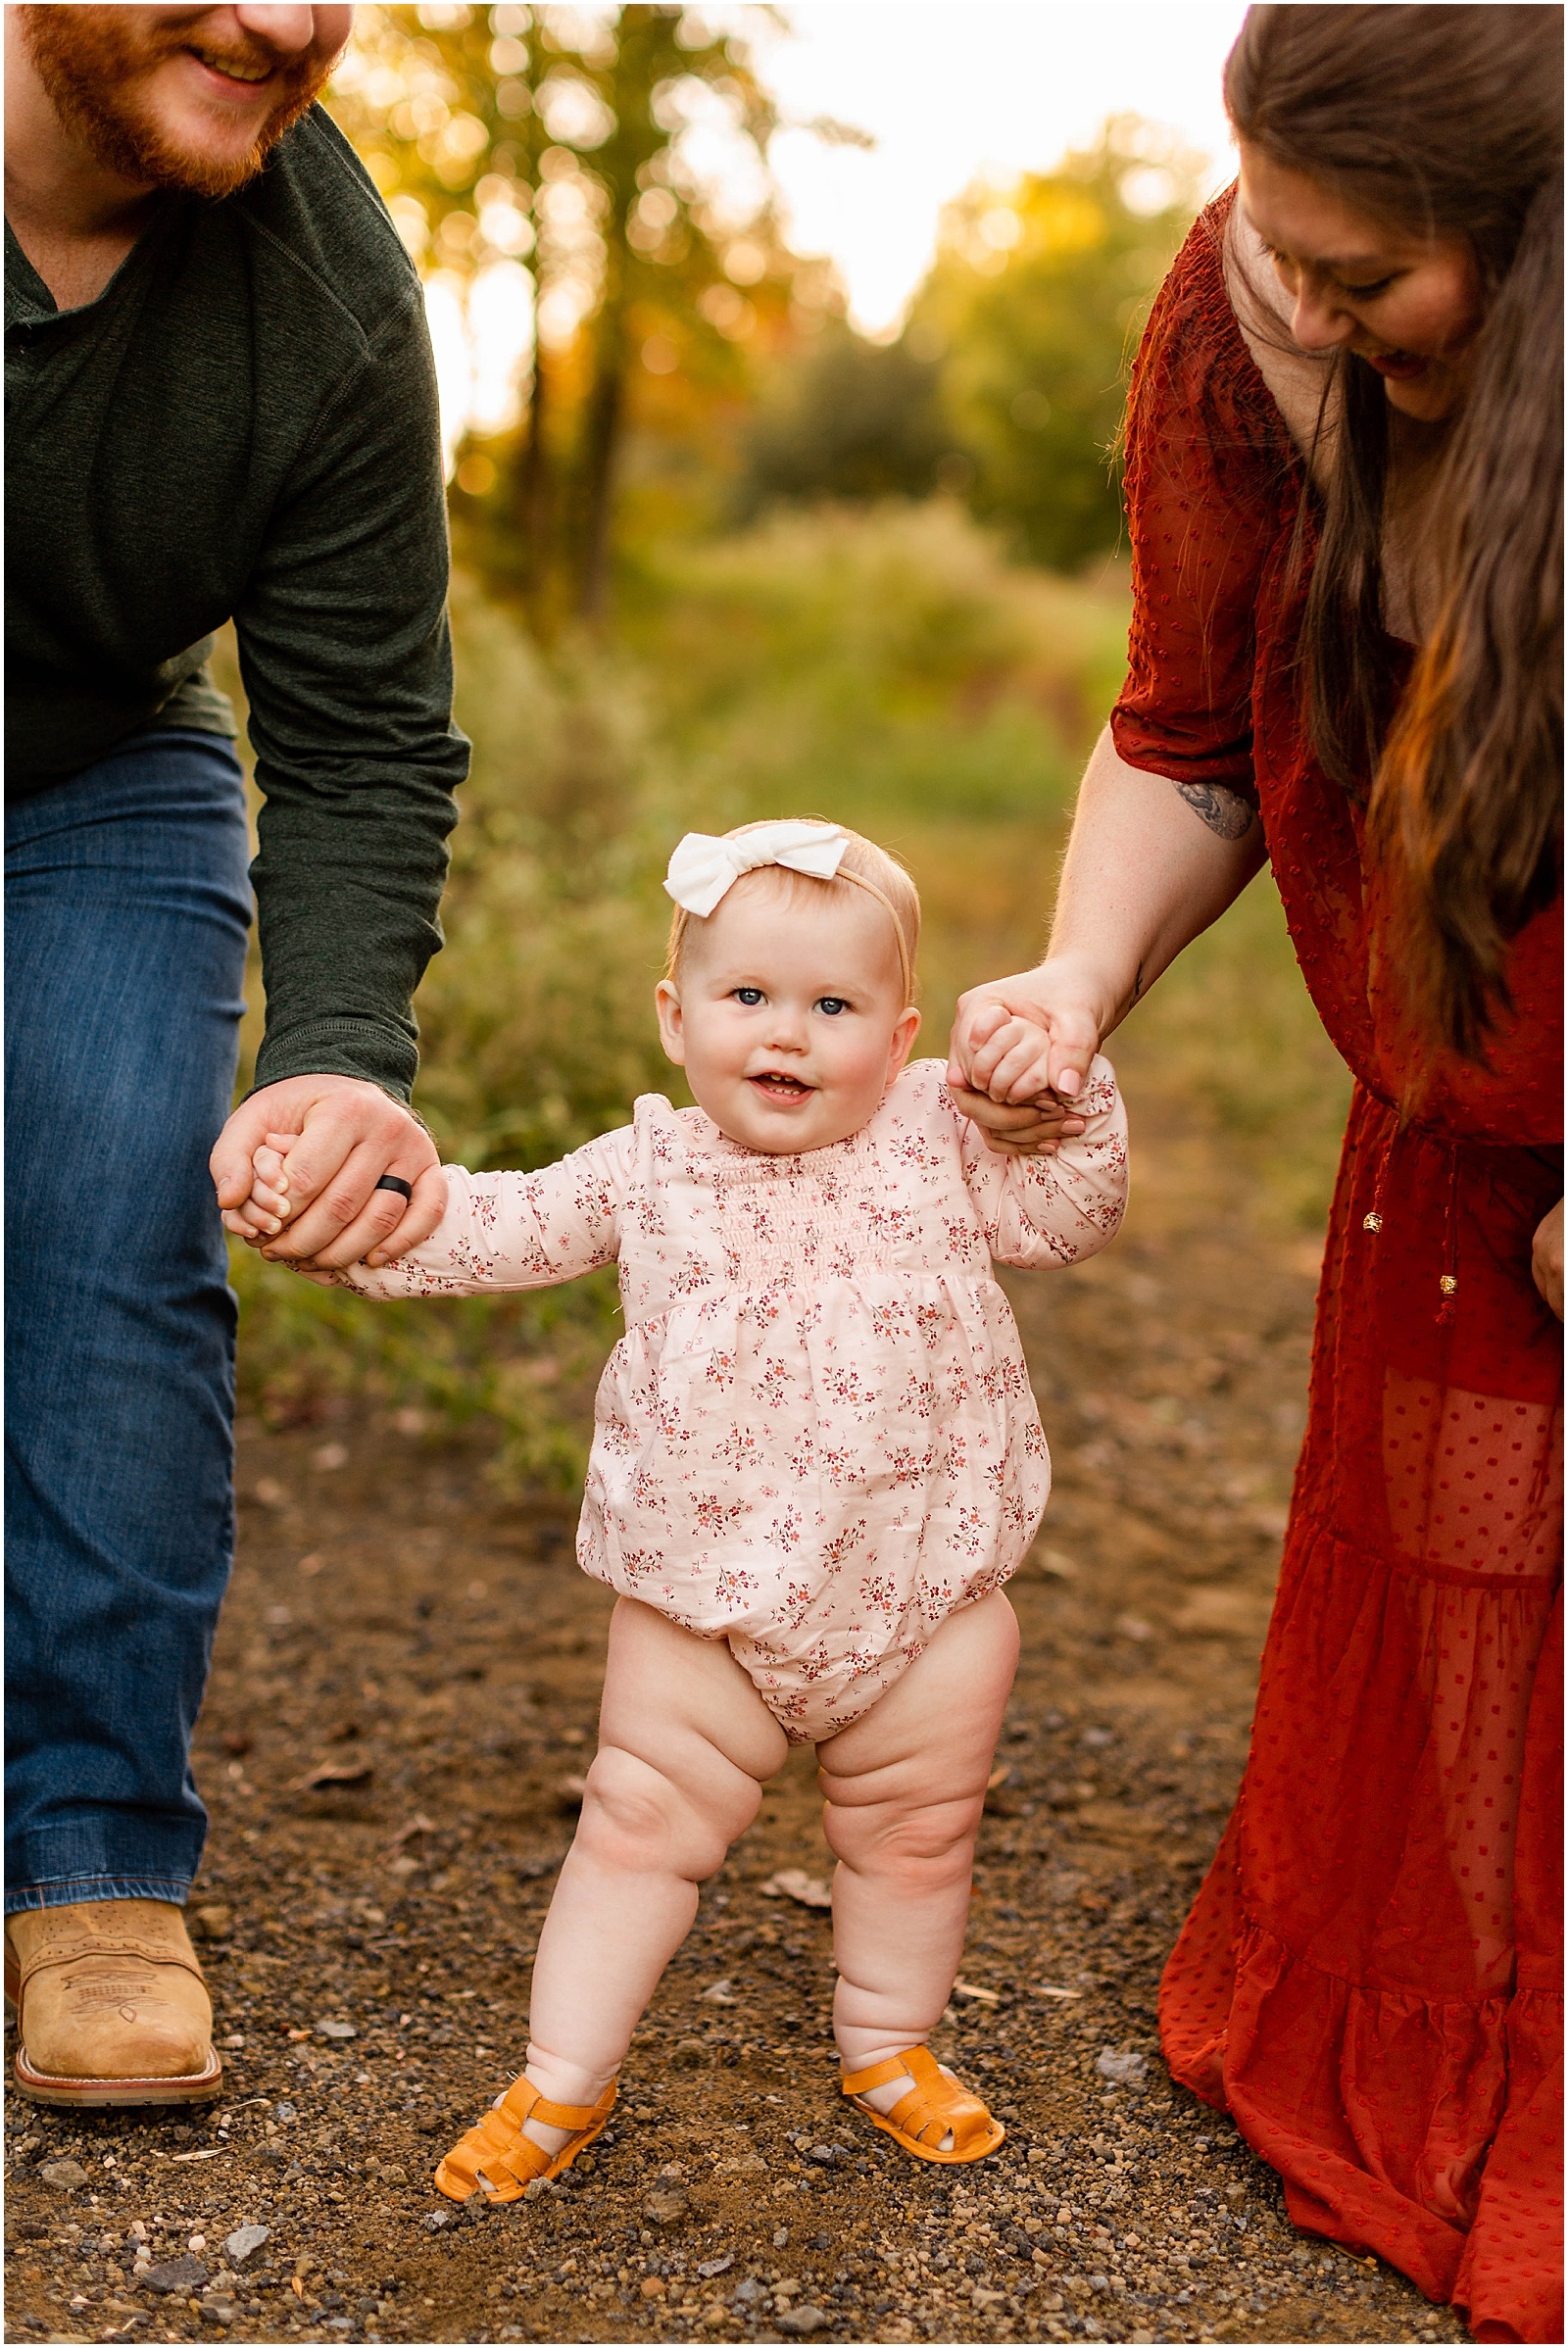 The Peck's Fall Family Session Bret and Brandie Photography | Evansville Indiana Wedding Photographers_0027.jpg